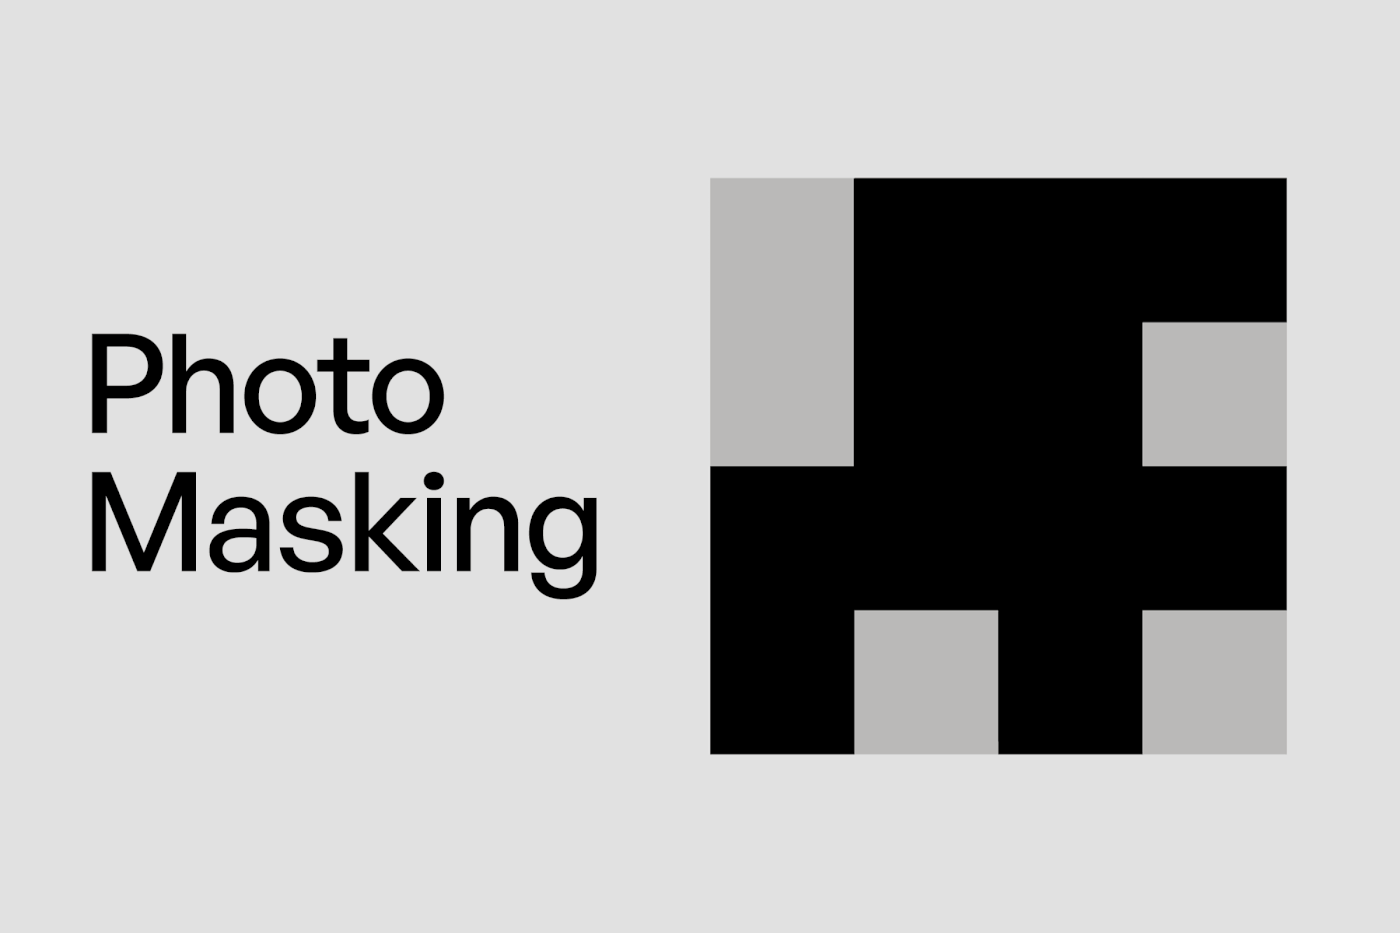 A simple gif of the masking visual system for the Total Service's rebrand.